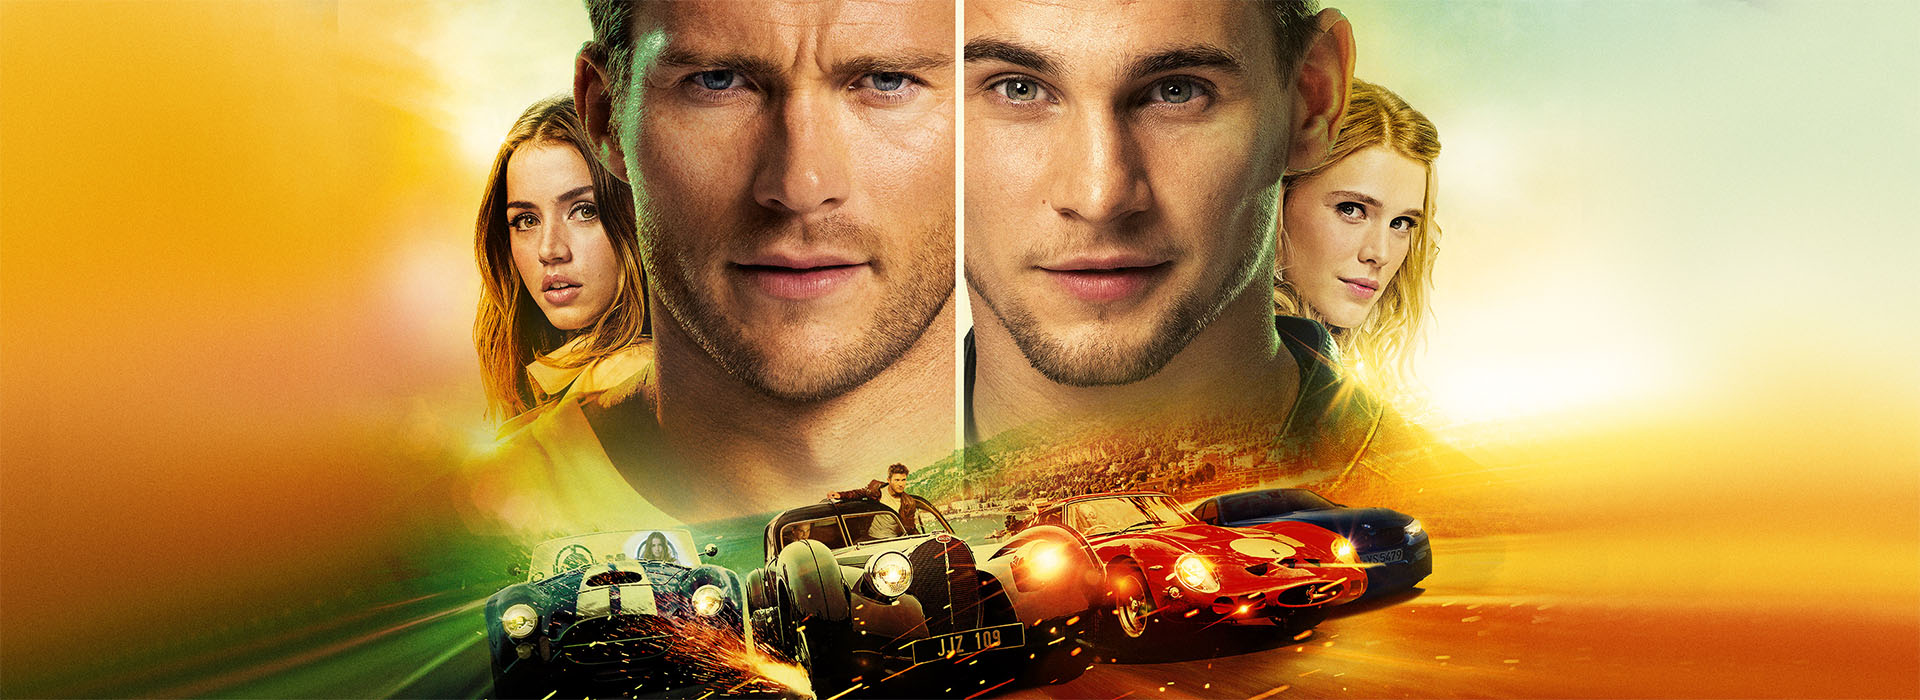 Movie poster Overdrive